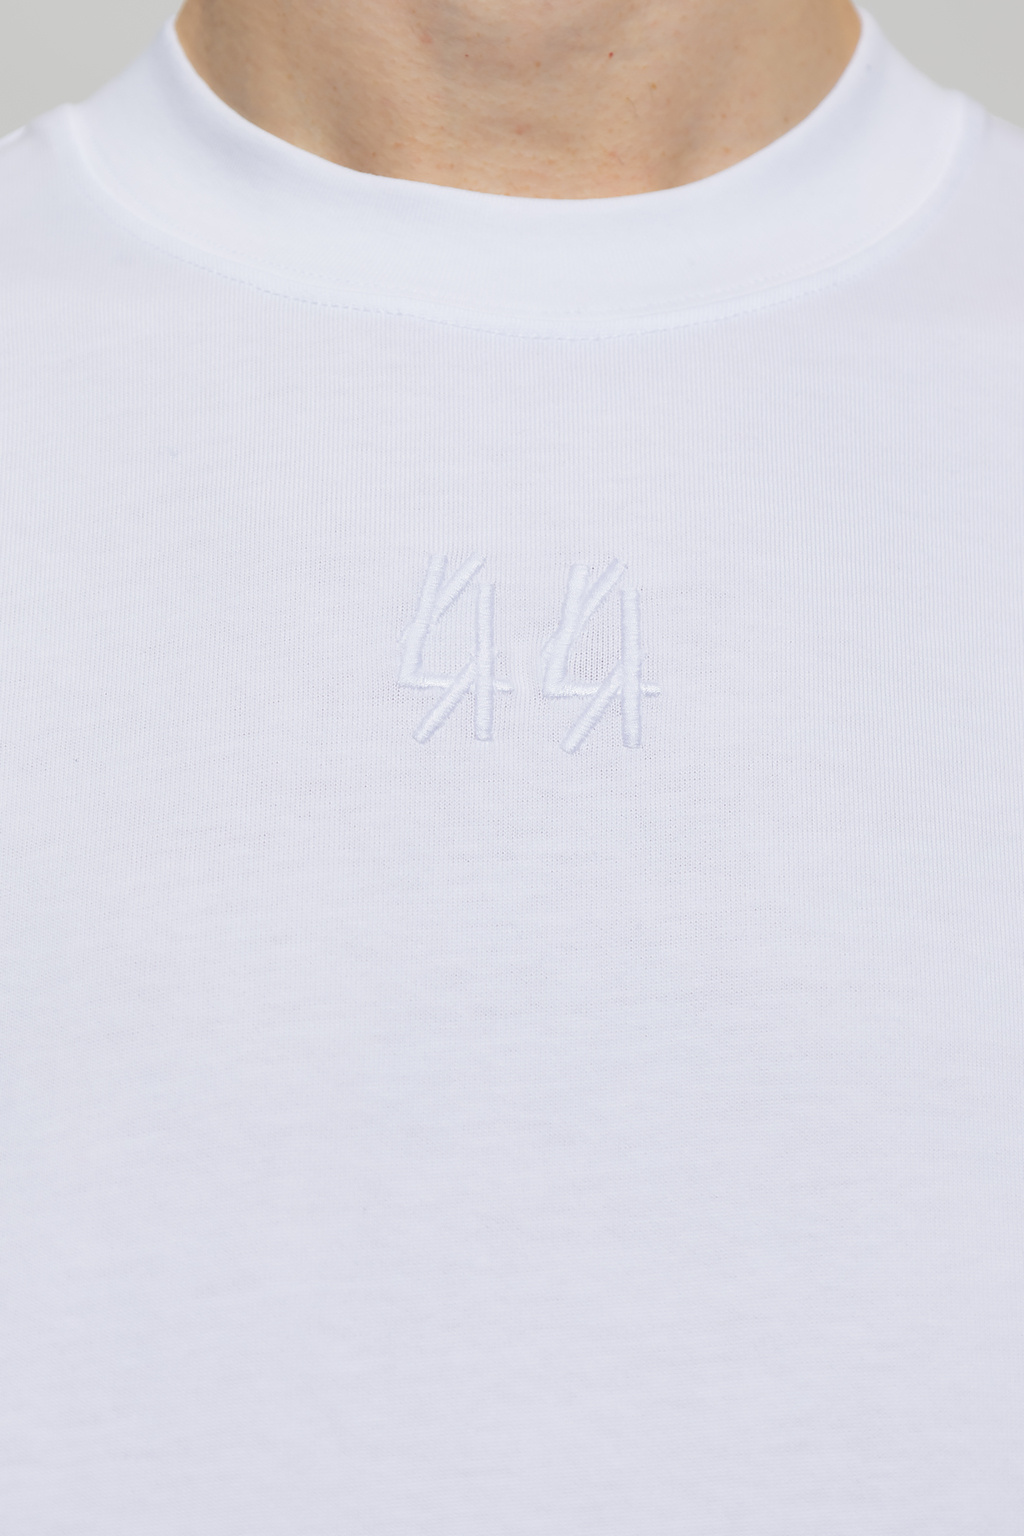 44 Label Group Pop that collar and make the day yours in the ® Organic Windansea Short Sleeve Woven Shirt